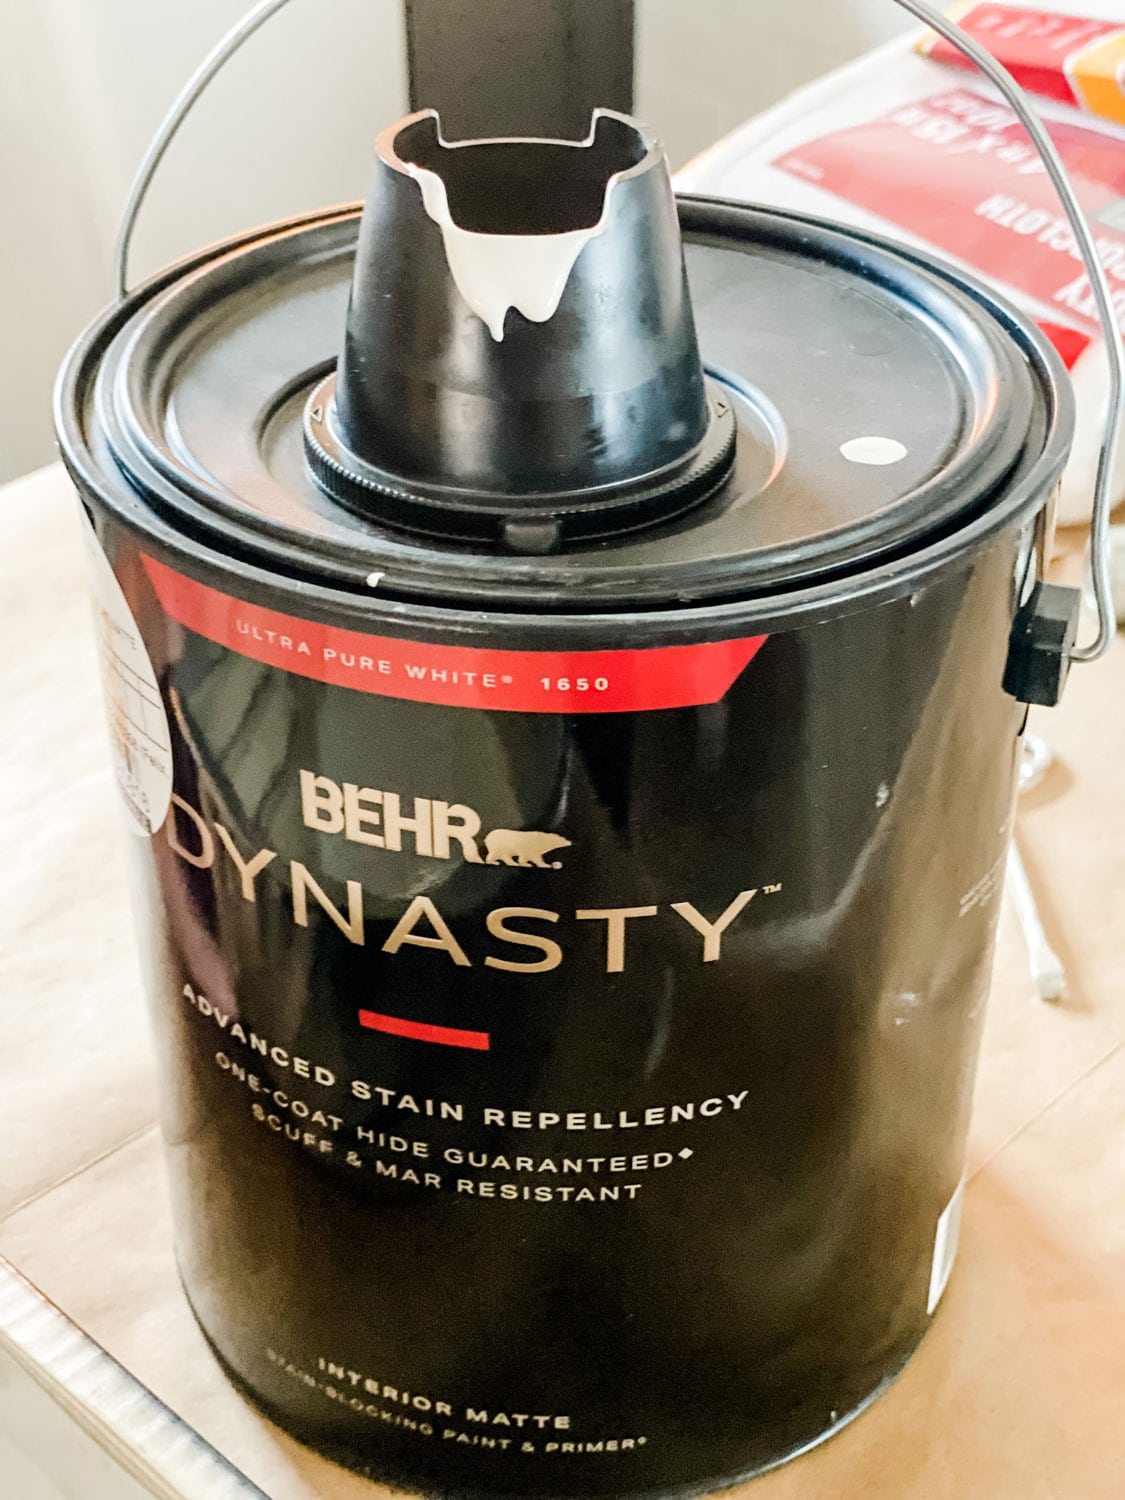 How To Open Behr Paint Can Pour Spout! Difficult the First Time